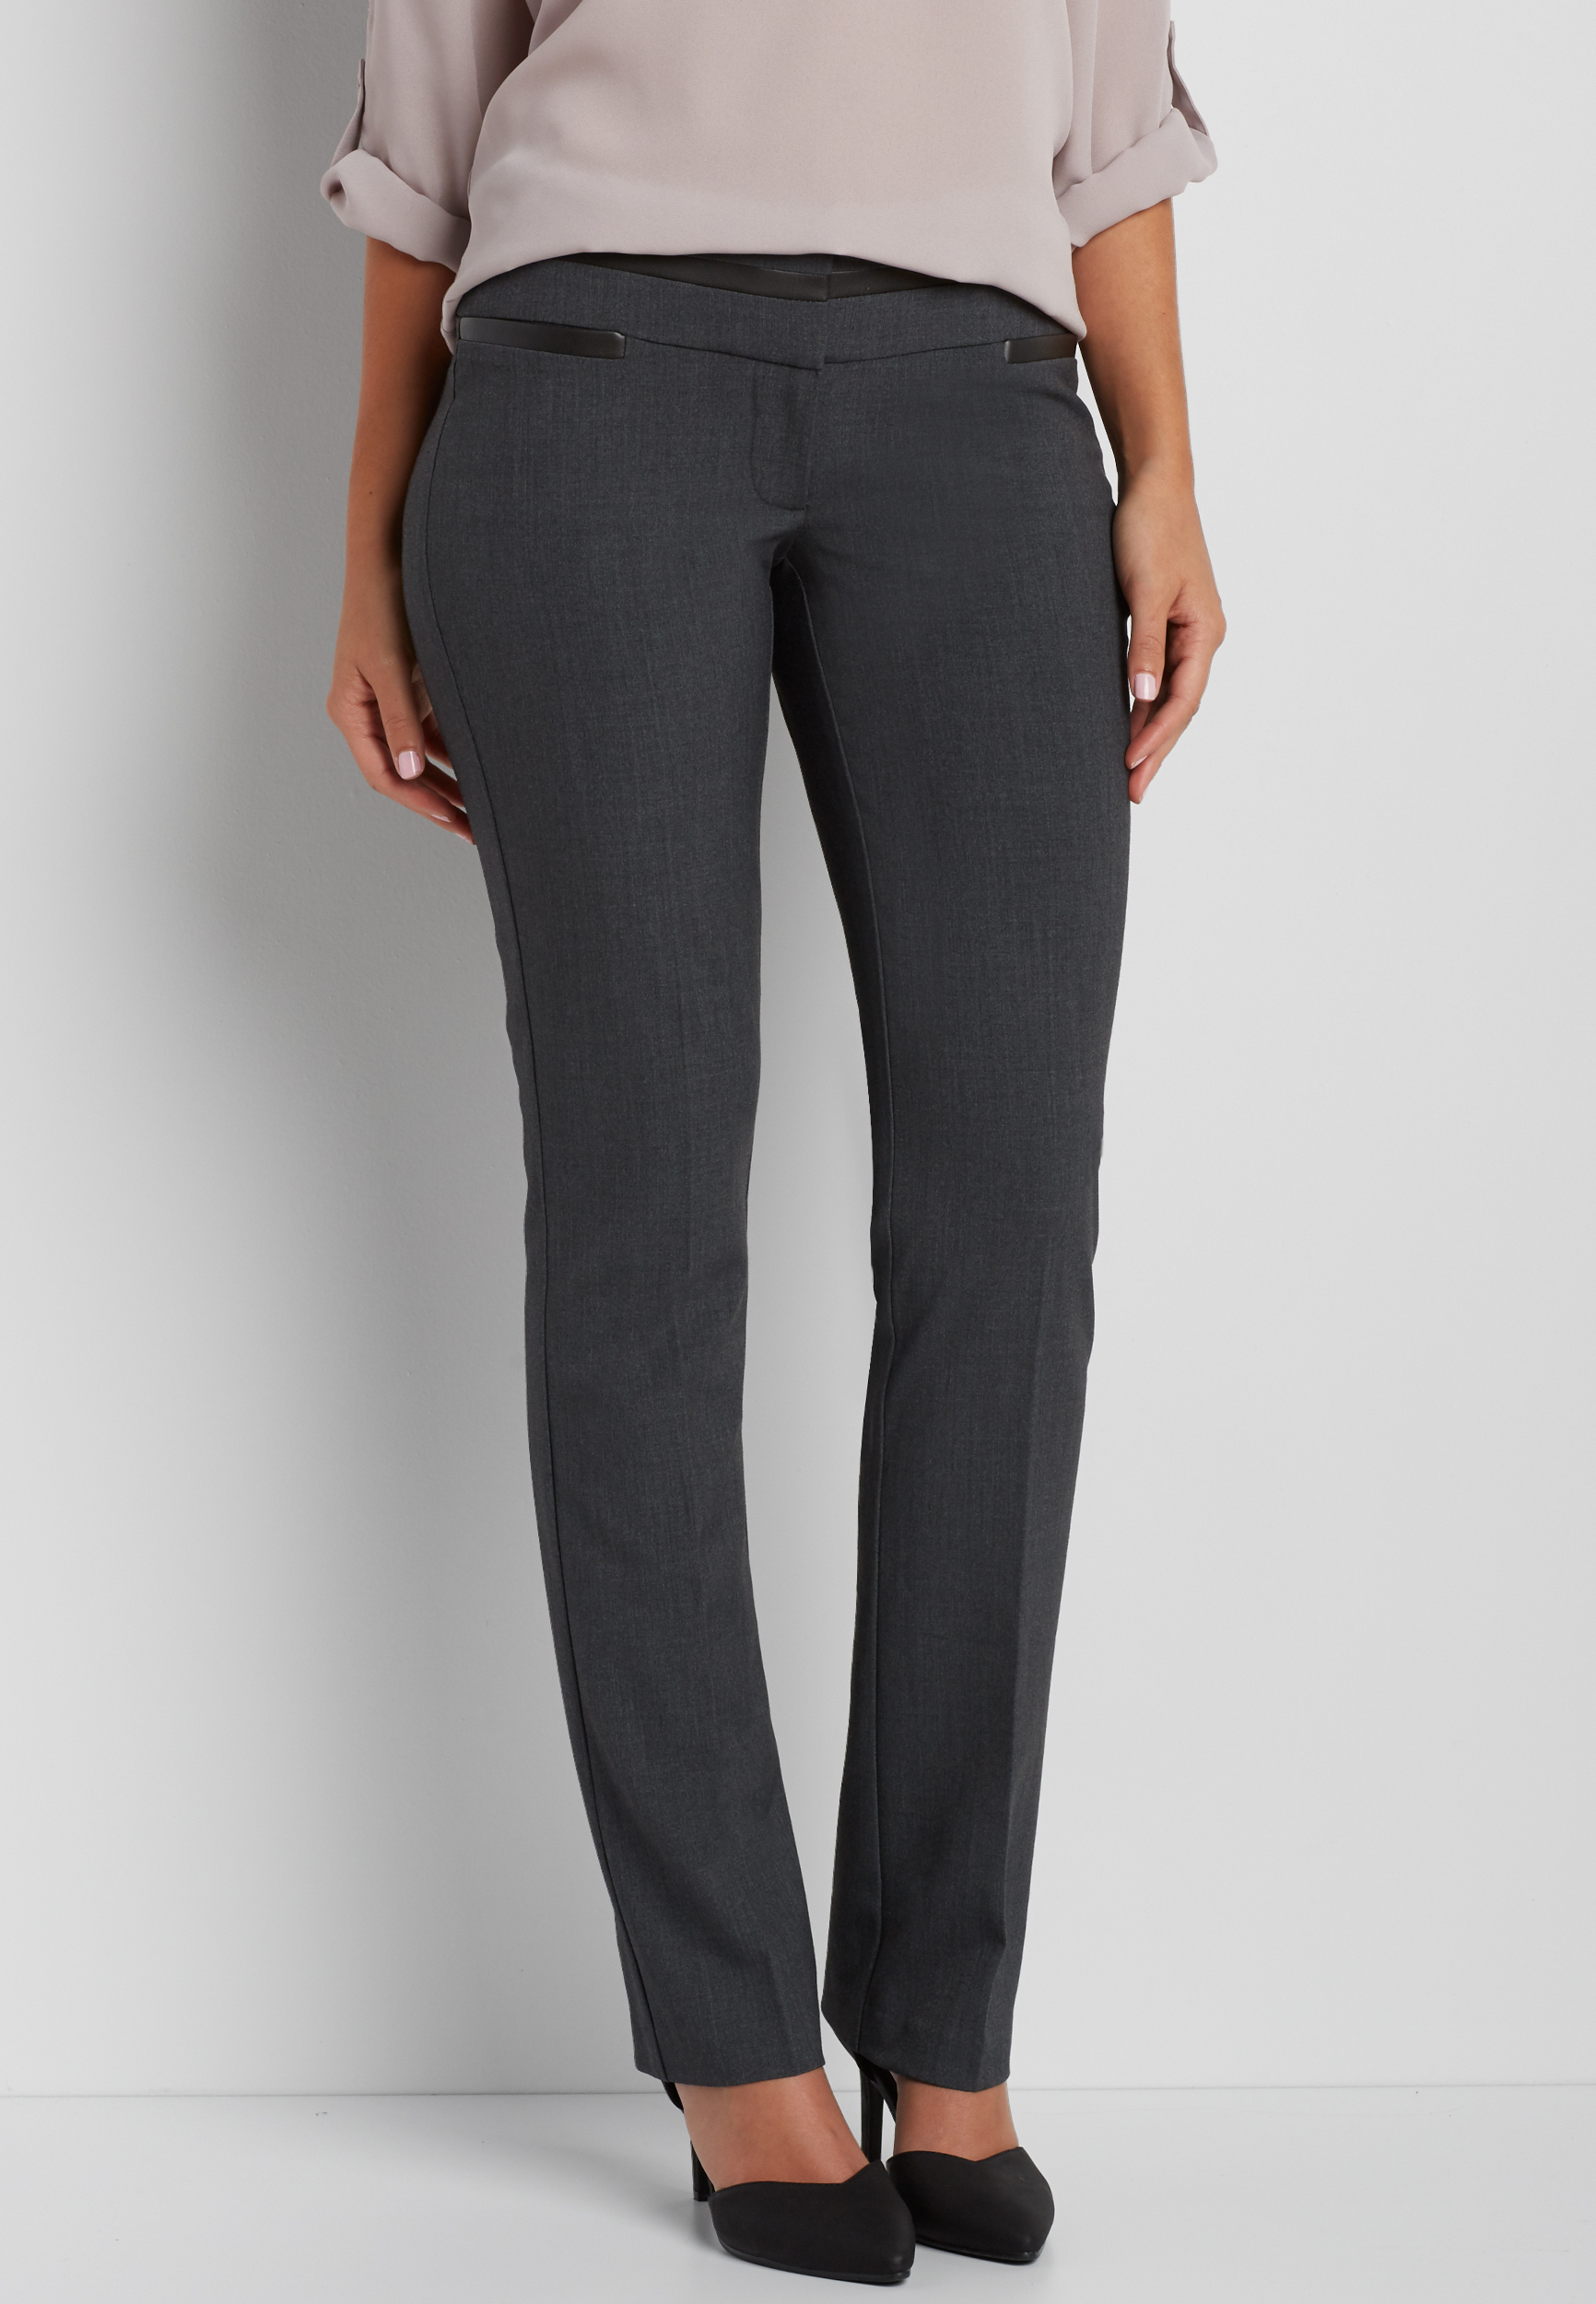 the stunning IT fit slim boot pant with faux leather trim in charcoal